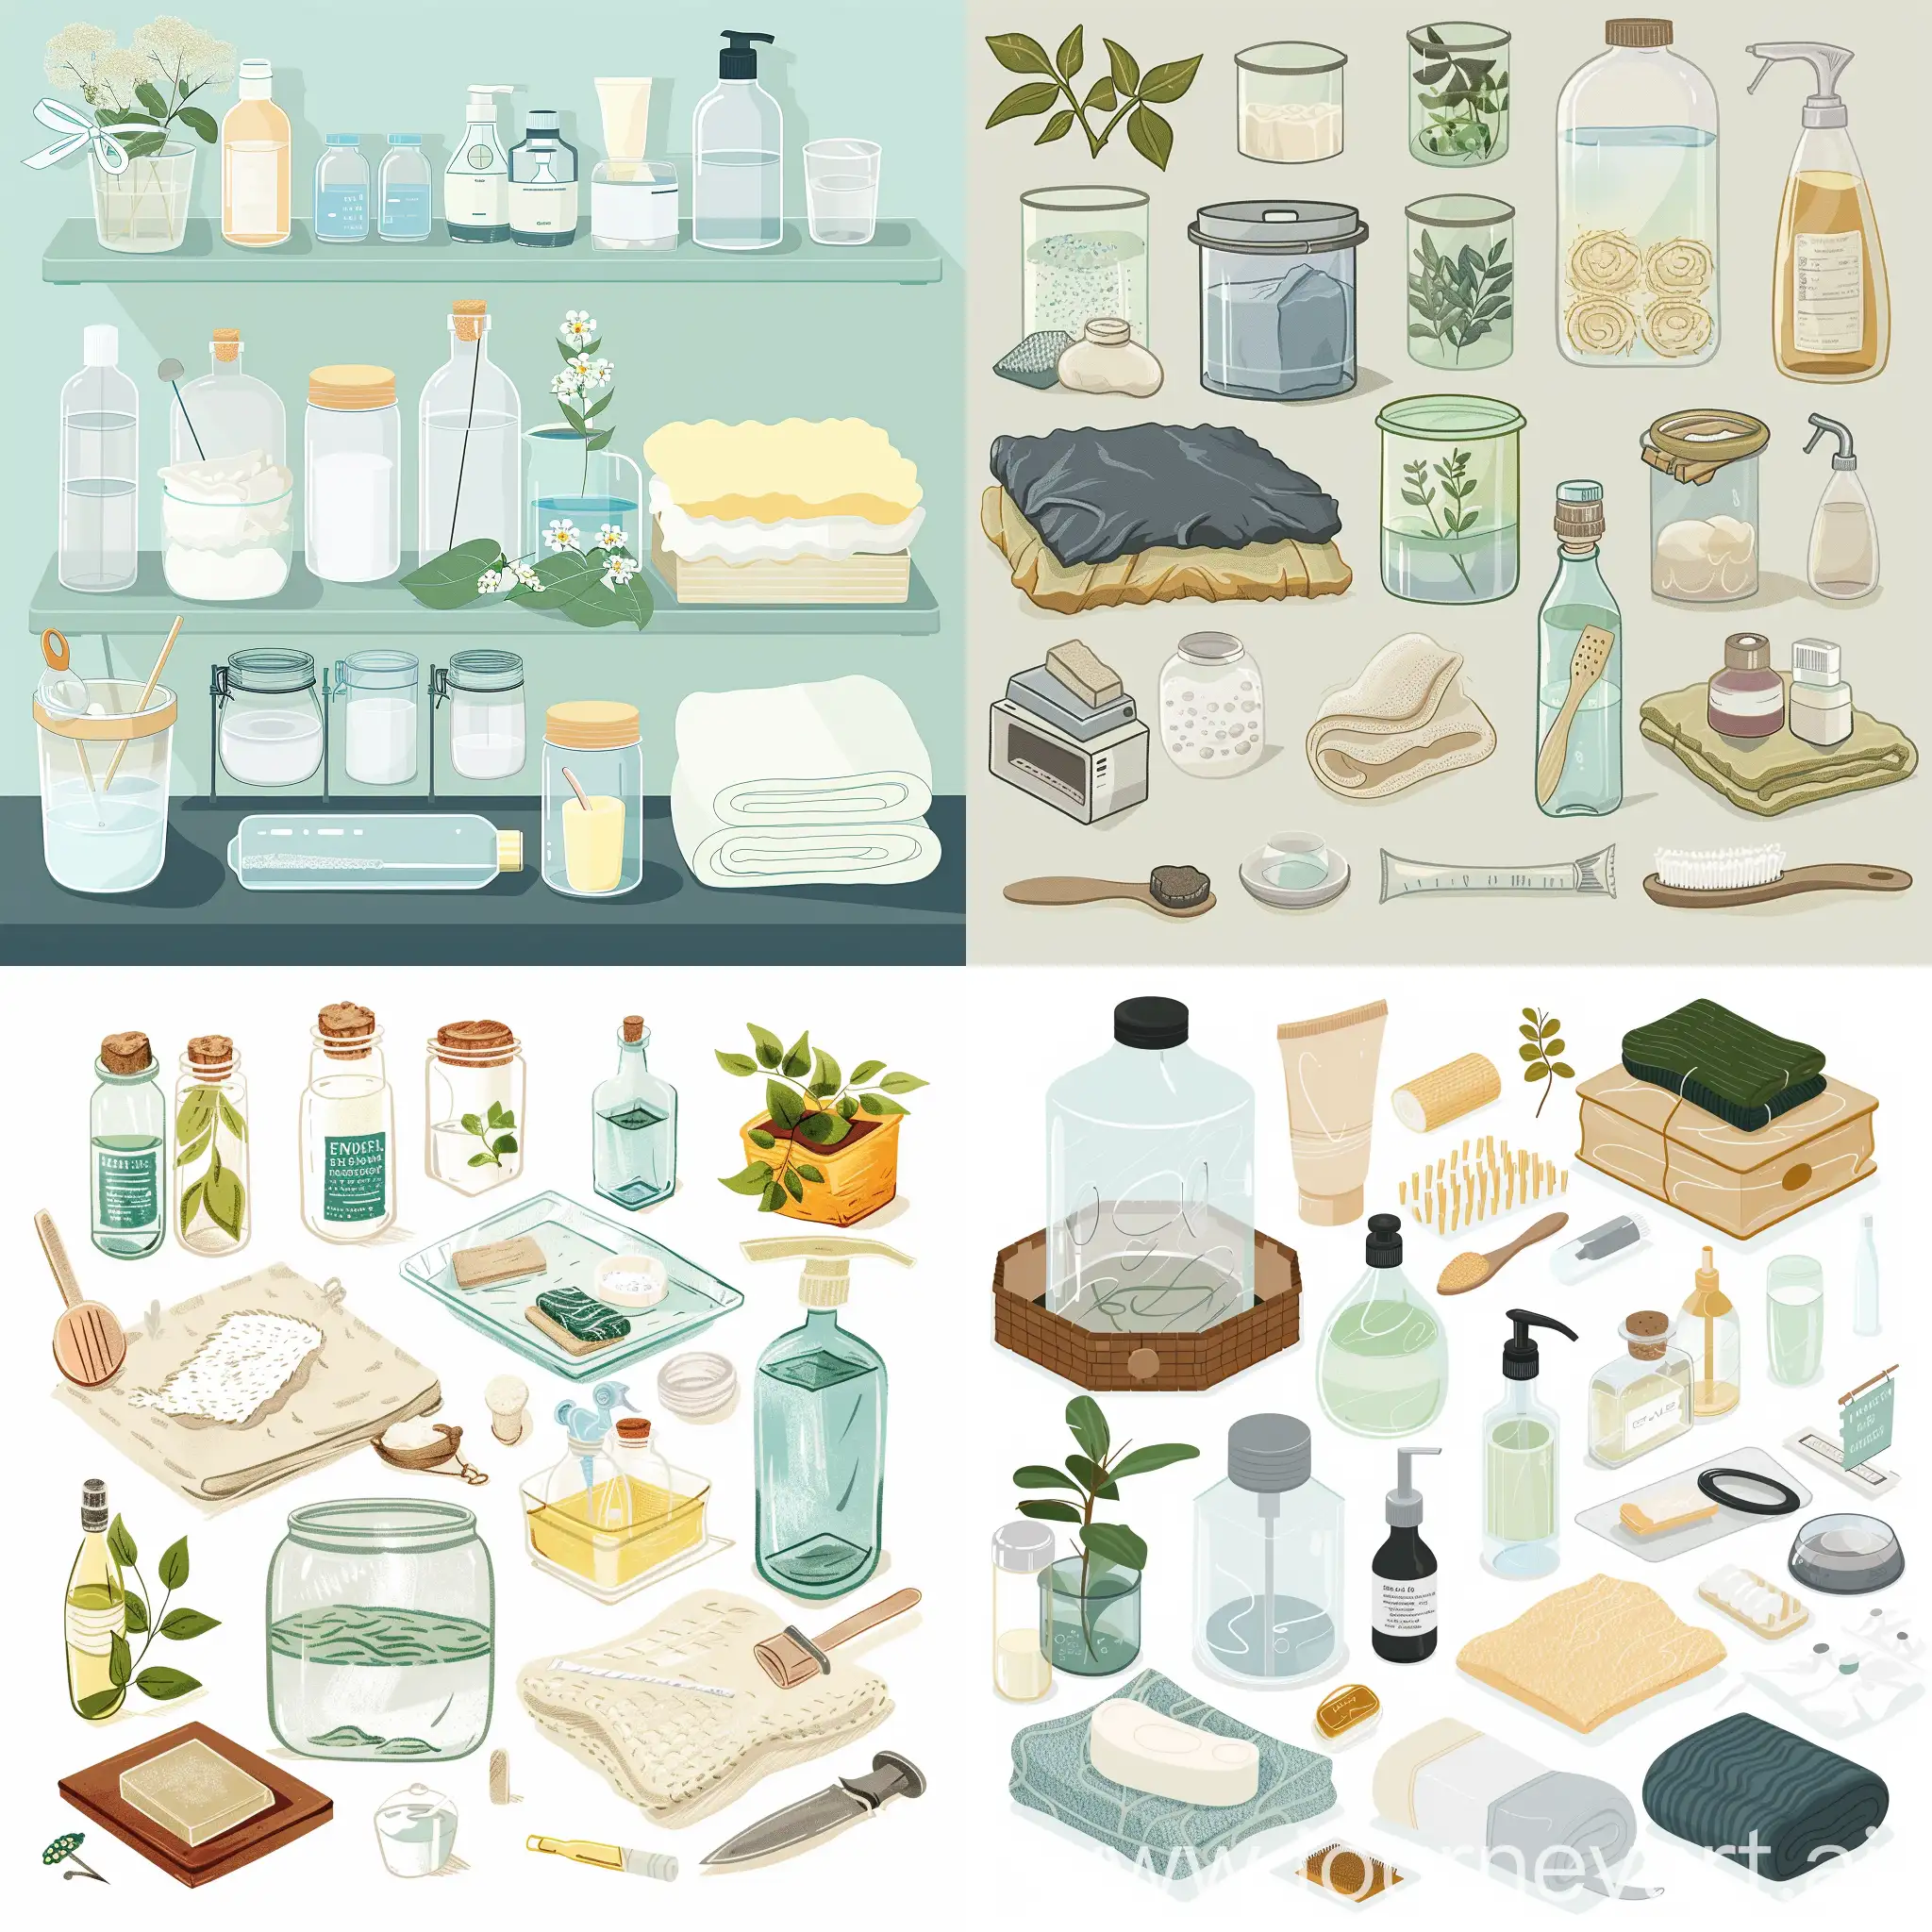 Generate a 2D illustration of a household setting with various items and practices aimed at minimizing exposure to endocrine disruptors. Include visual elements such as glass containers, natural soap, wool or cotton bedding, filtered water, and other alternatives to common household items that may contain harmful chemicals.